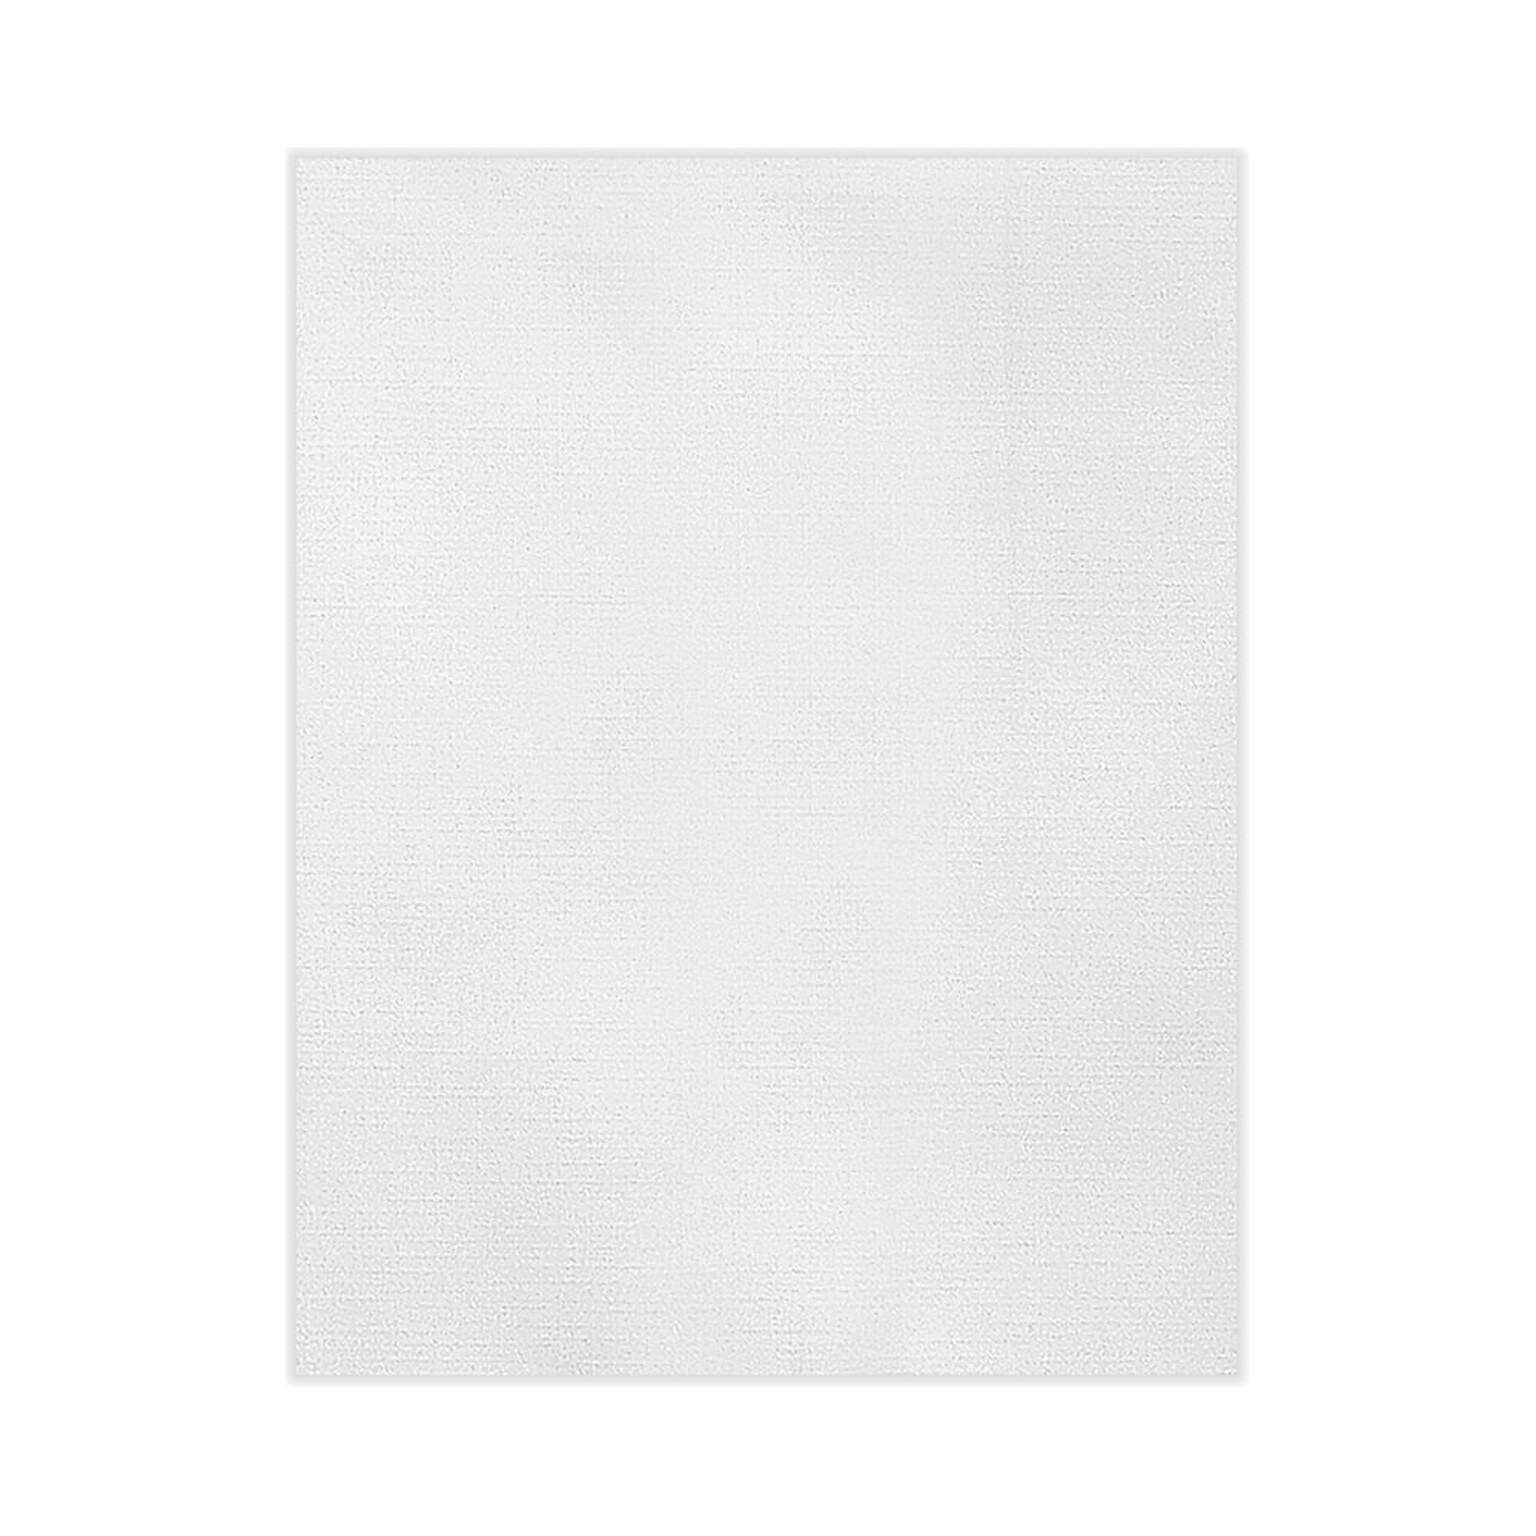 Lux Cardstock, 110 lb,  8.5 x 11, White Linen, 250/Pack